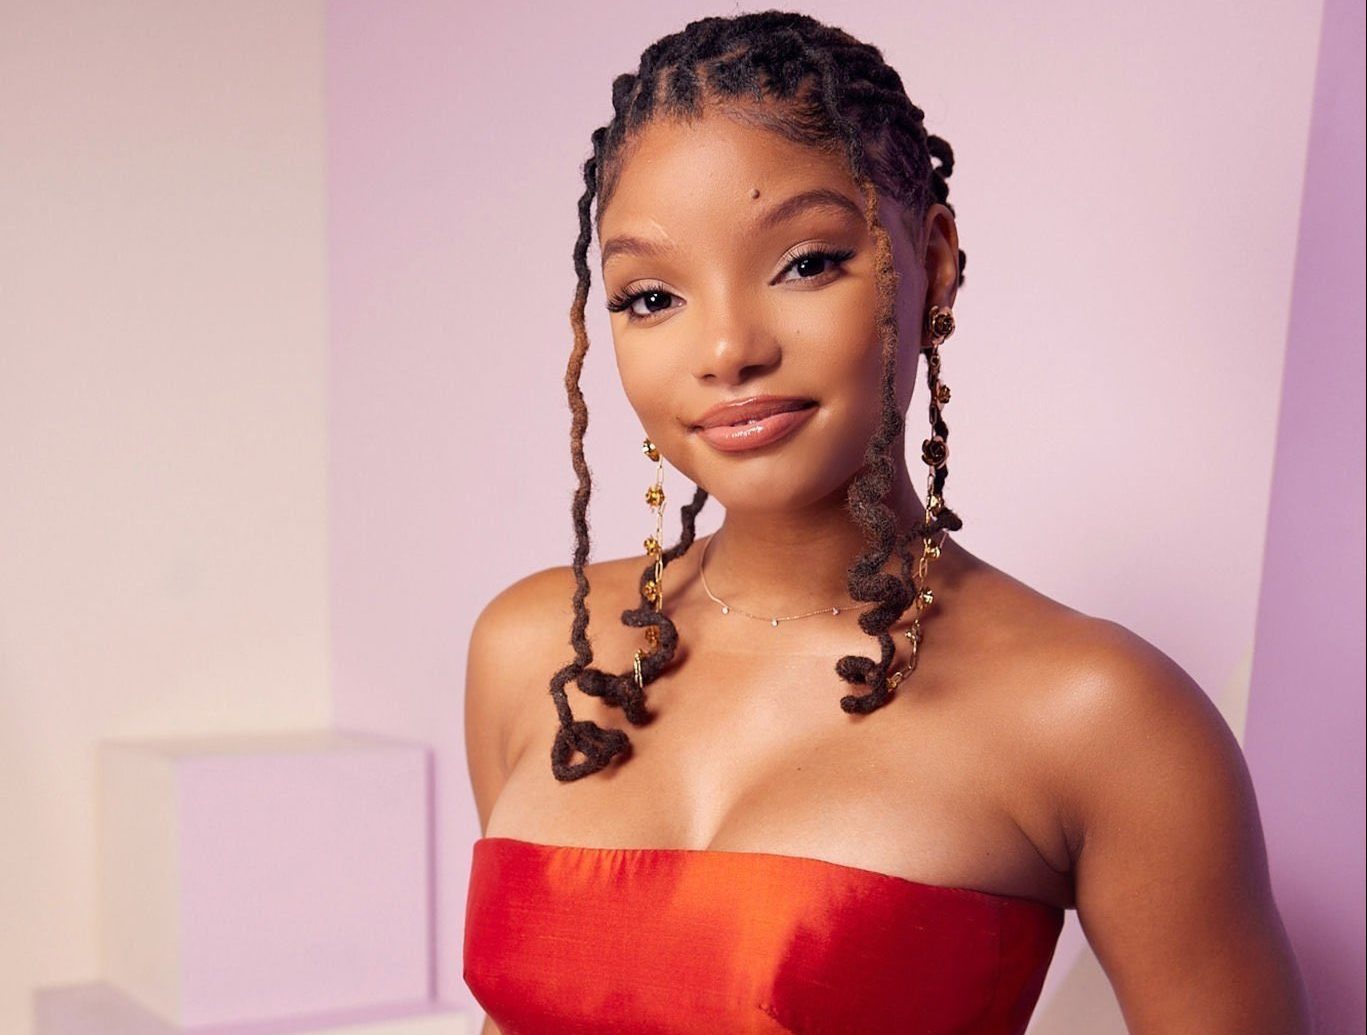 [WATCH] First Look Teaser of ‘The Little Mermaid’ Starring Halle Bailey